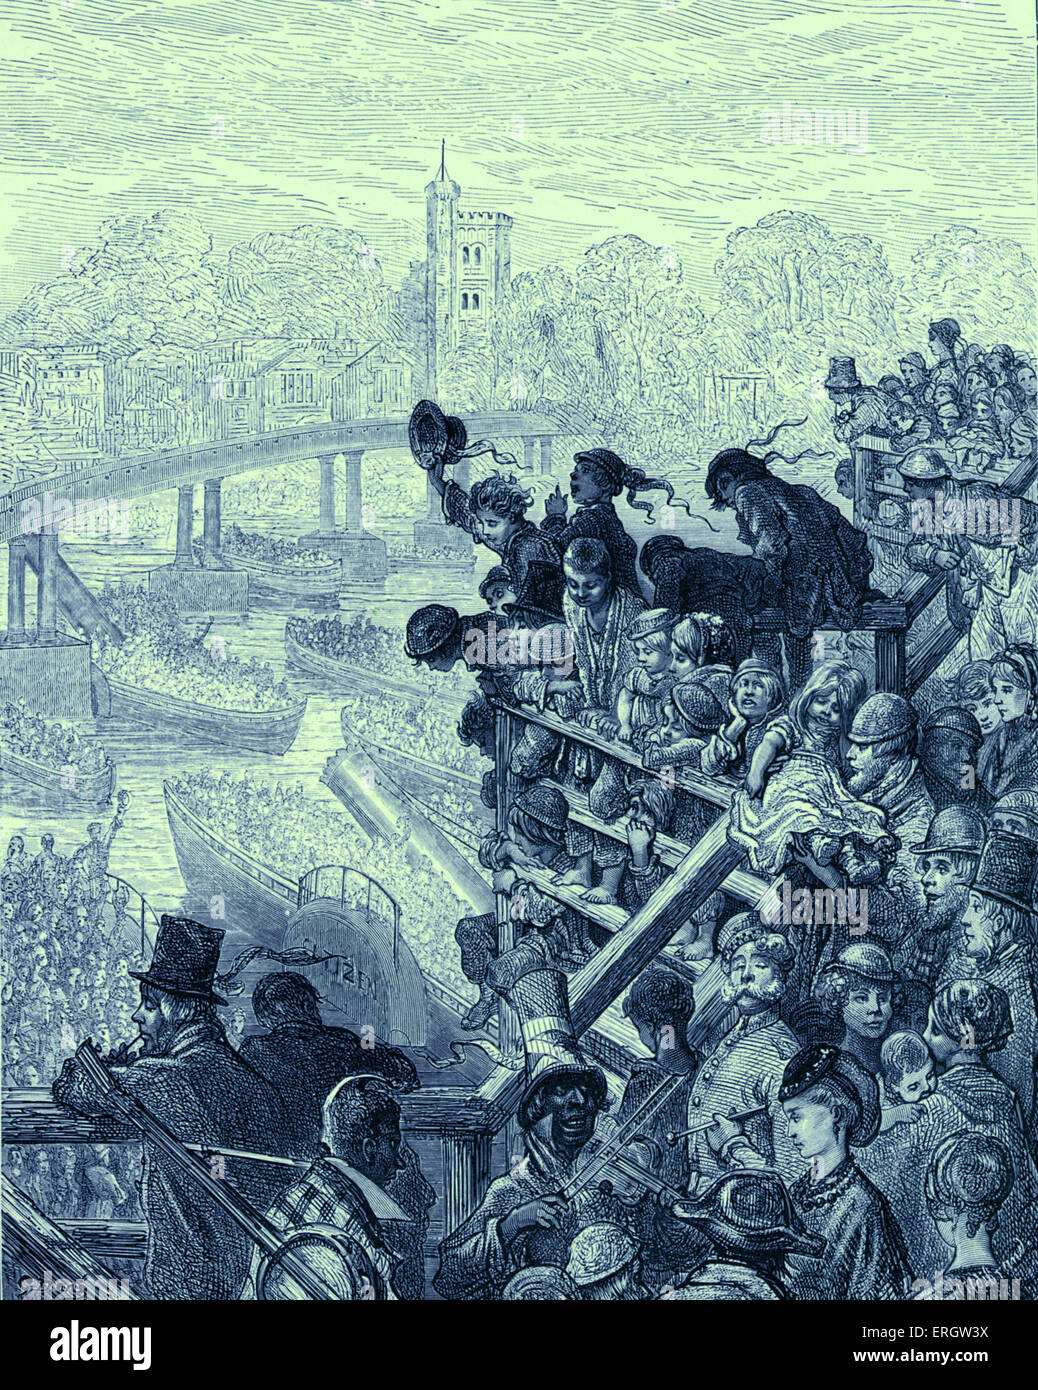 Oxford and Cambridge boat race - with the boats passing under Putney Bridge, London. Men, women and children leaning over bridge and cheering. Fiddle and banjo player entertaining crowd. Engraving by Gustave Doré. 'London, a Pilgrimage', by Gustave Doré and Blanchard Jerrold, London 1872. Stock Photo